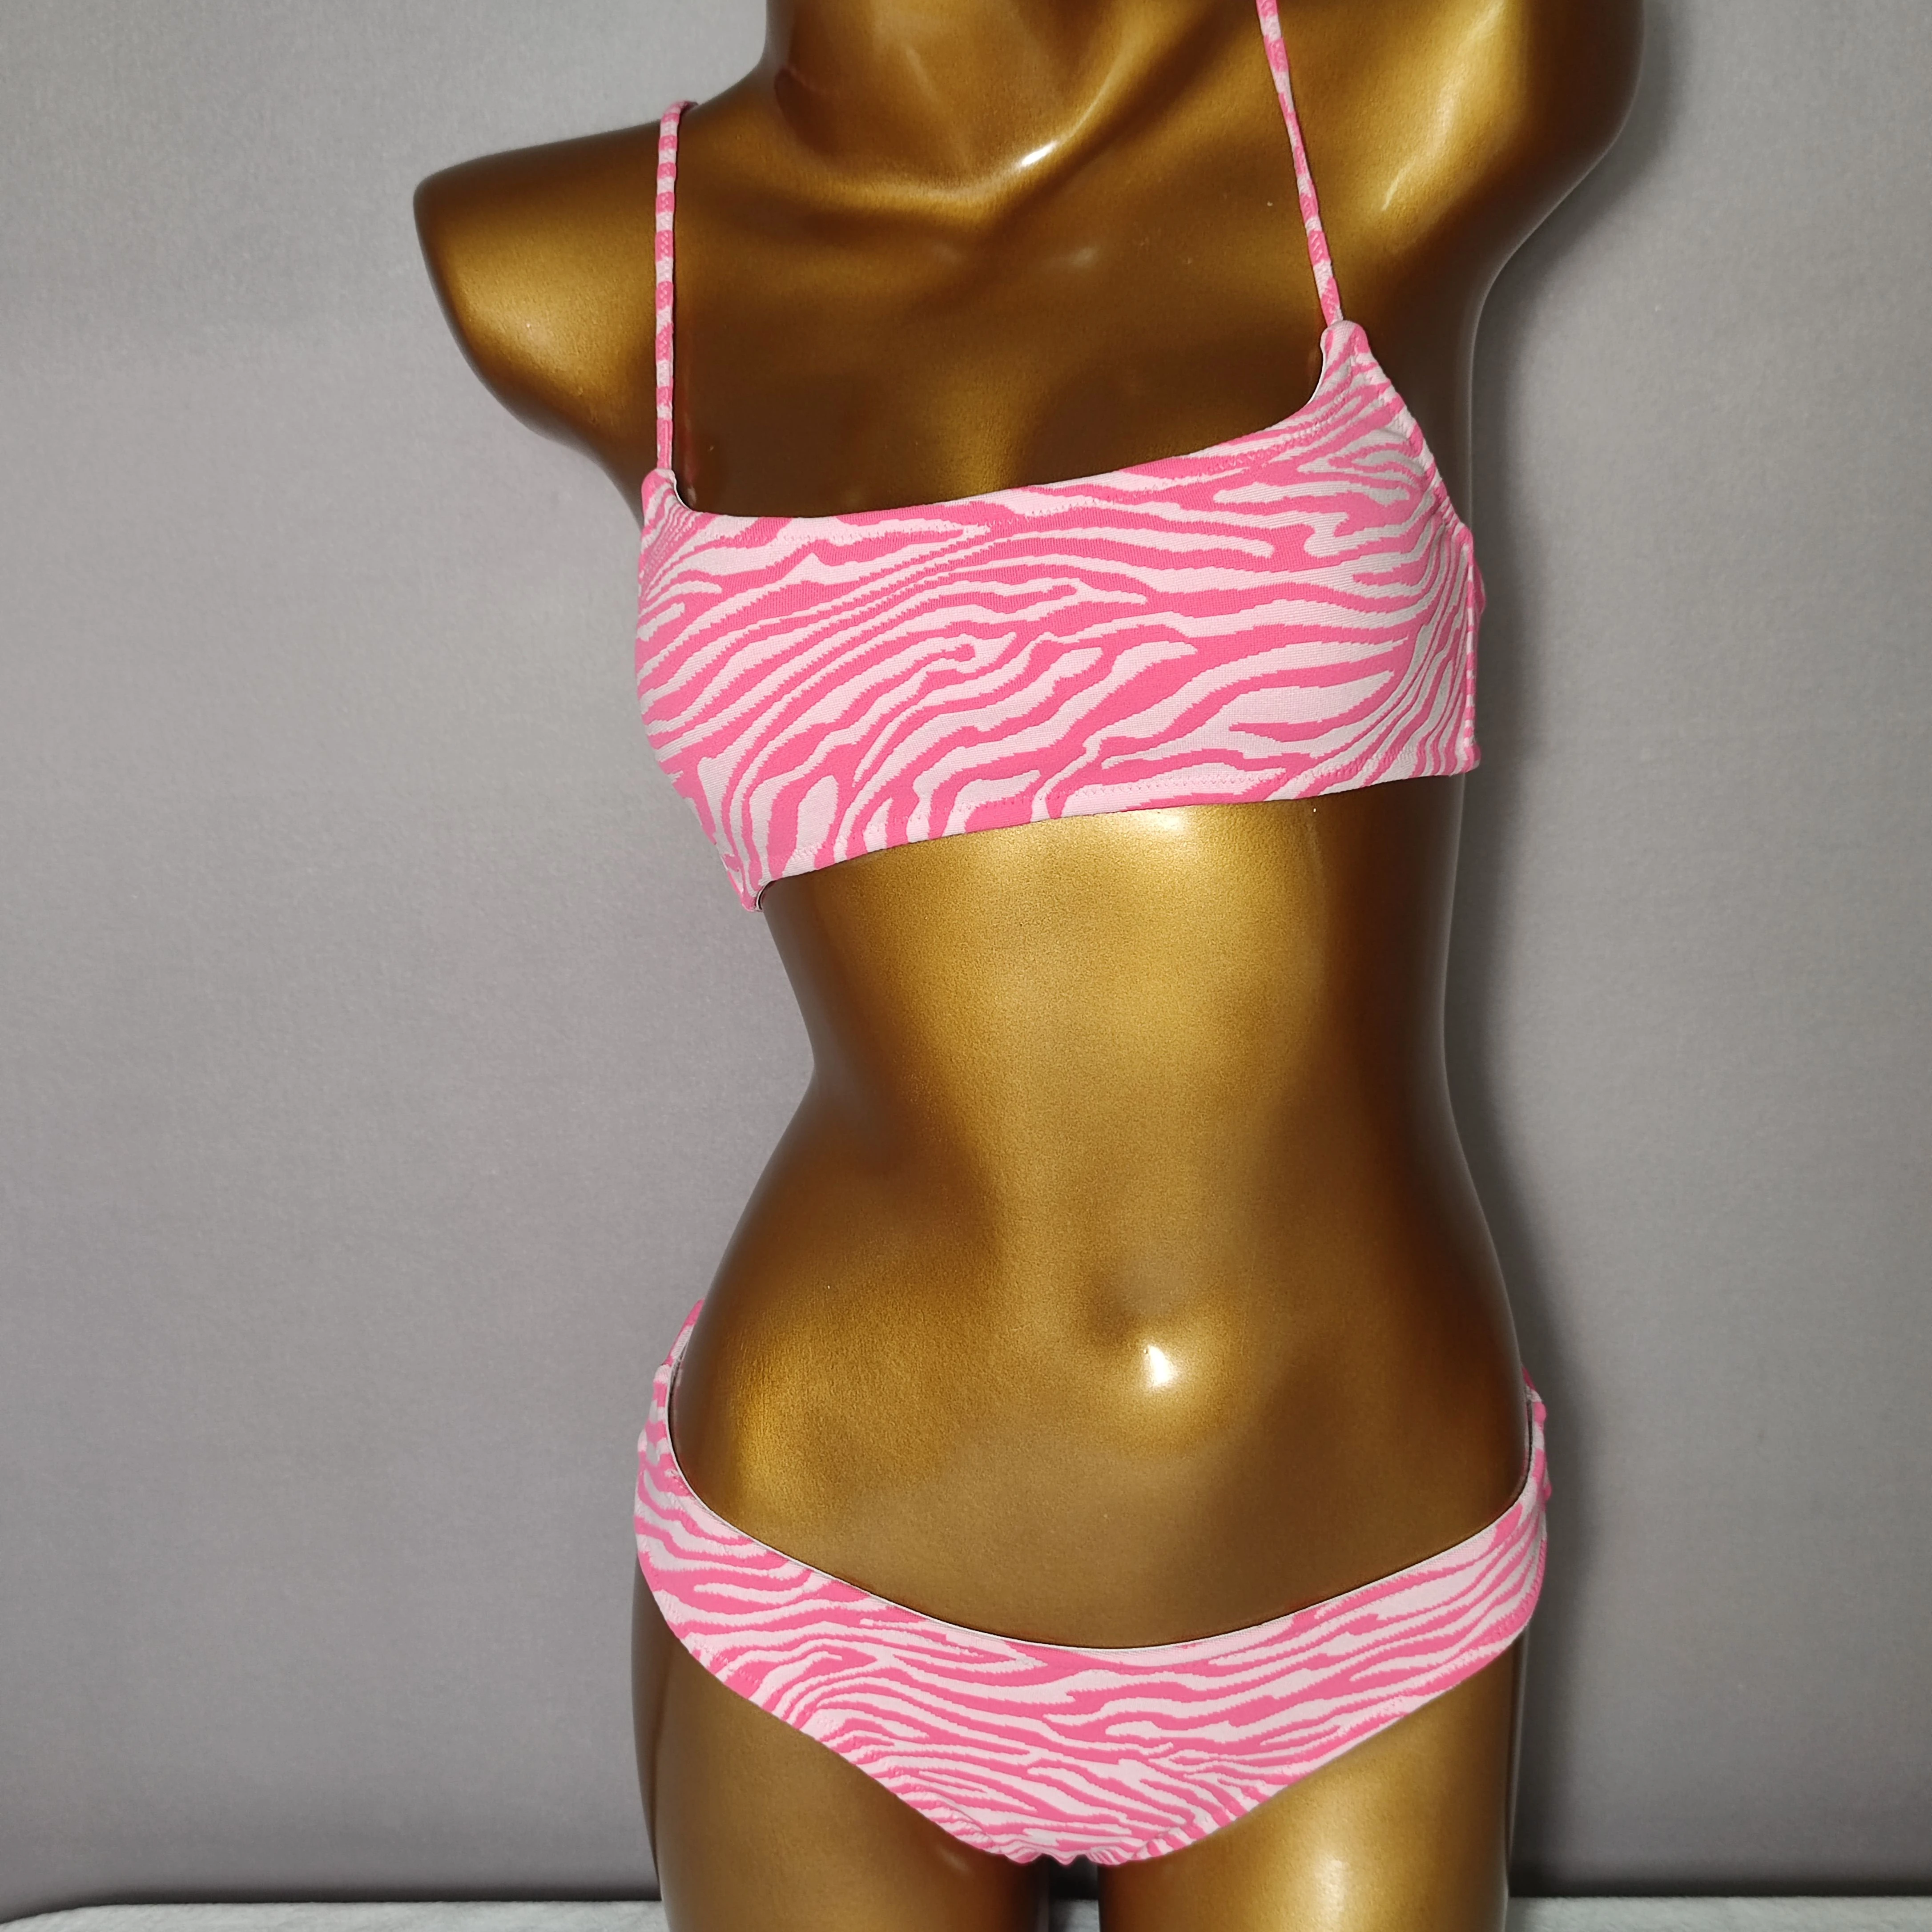 

2022 custom low MOQ fast delivery two piece bathing suit adjustable strap hot pink zebra print swimsuit, Solid